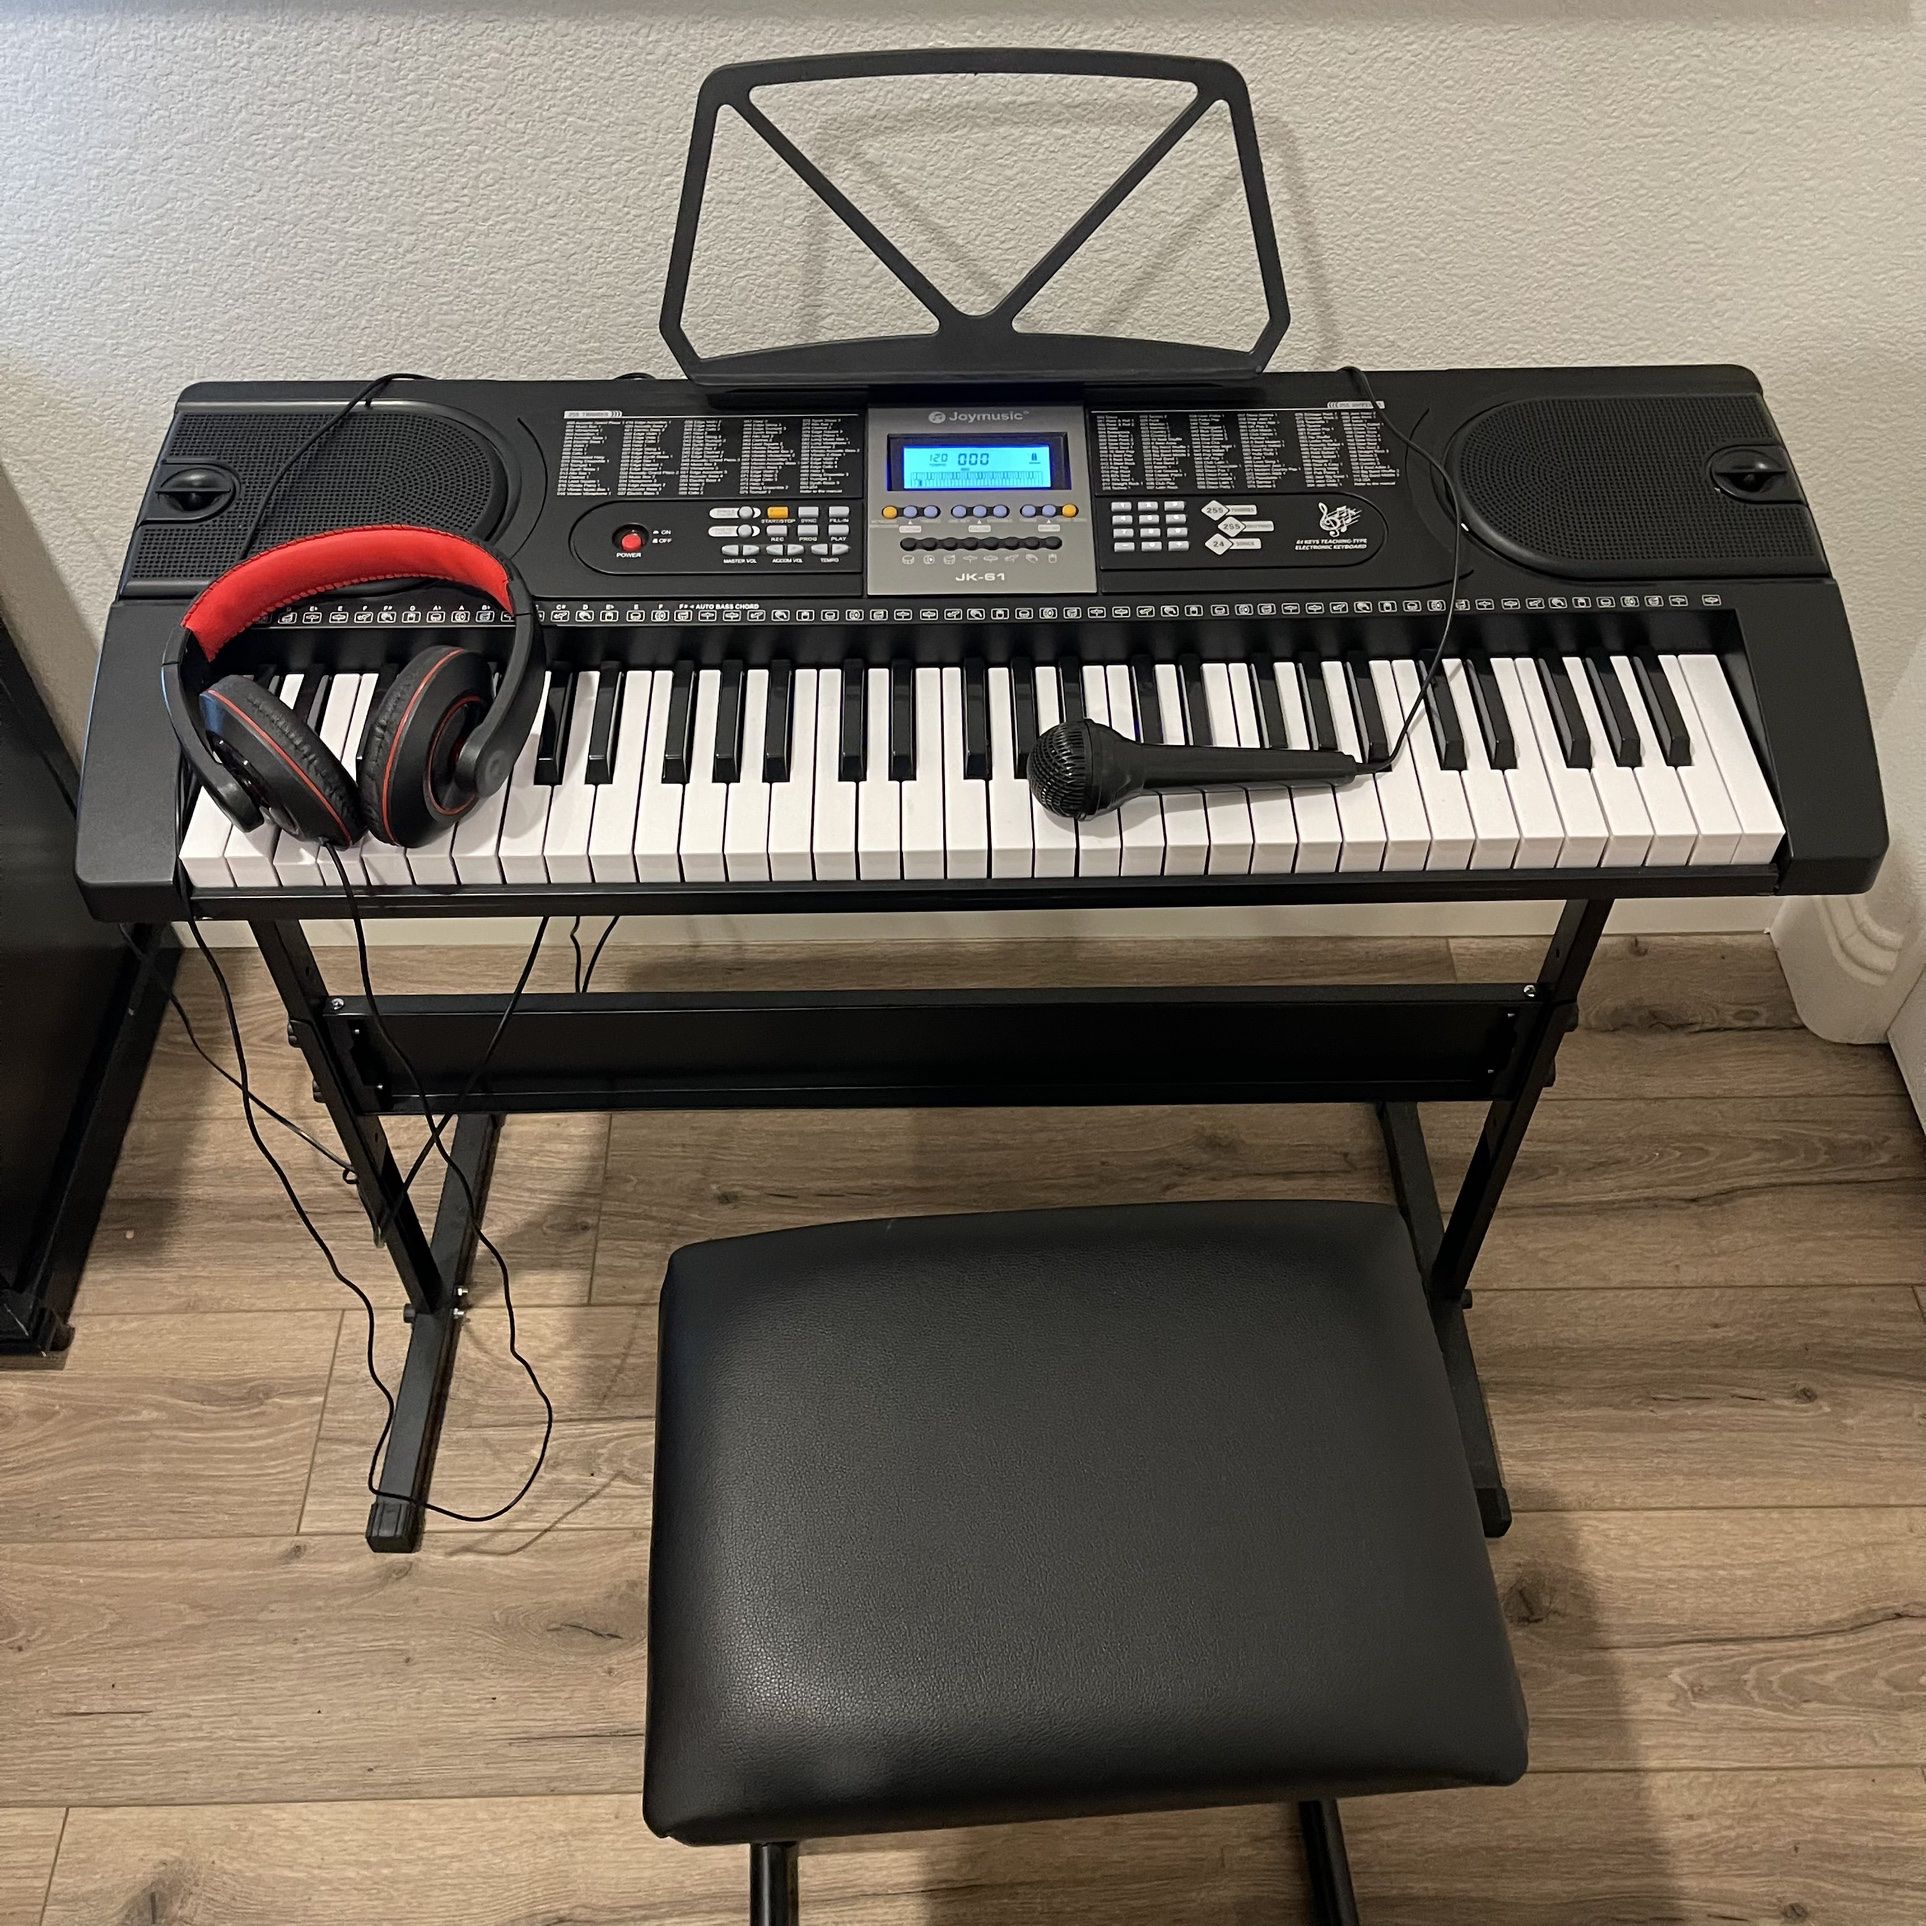 Like New Piano Set With Mic And headphone Plug In With A Table Stand!